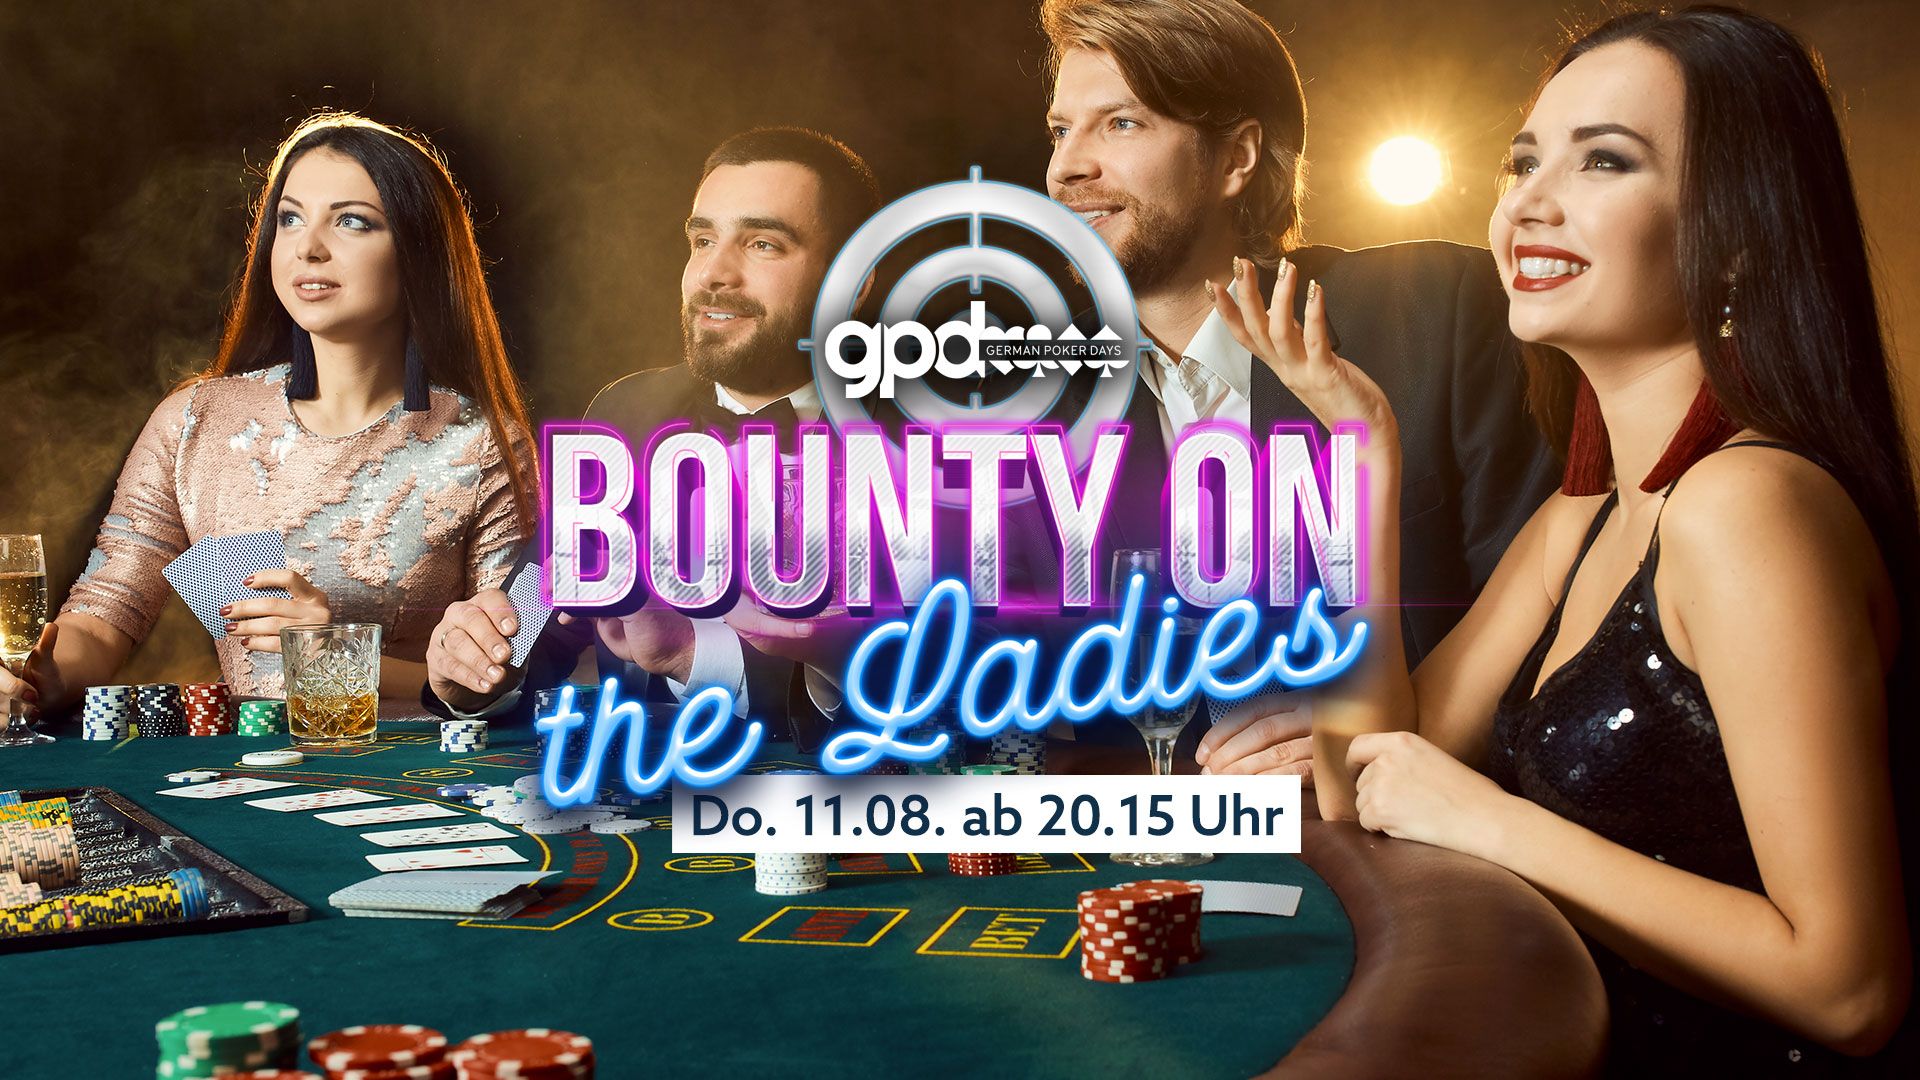 Bounty on the Ladies 700€ Added I Donnerstag 11.08.2022